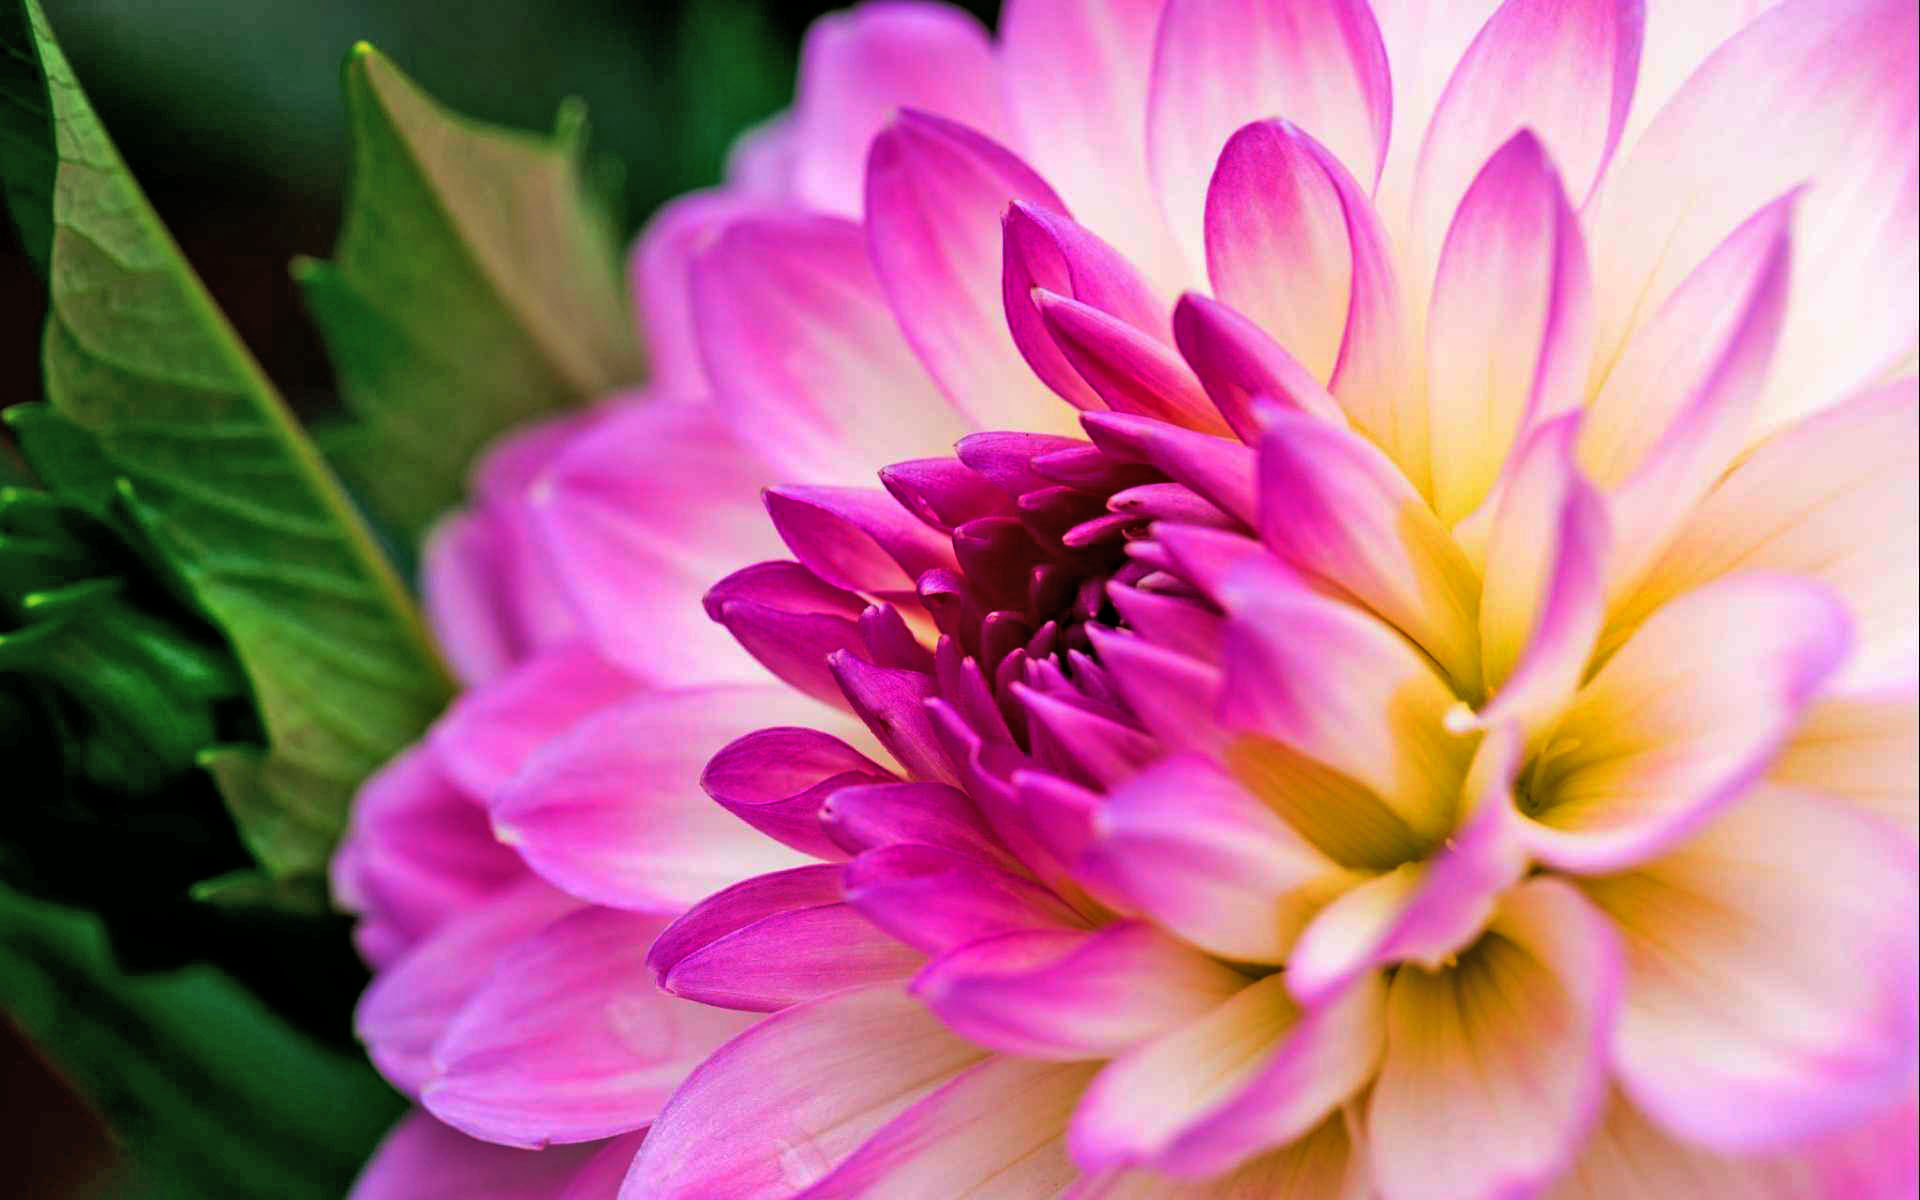 Dahlia Purple Flower And Green Leaves Close Up-1920x1200 : Wallpapers13.com